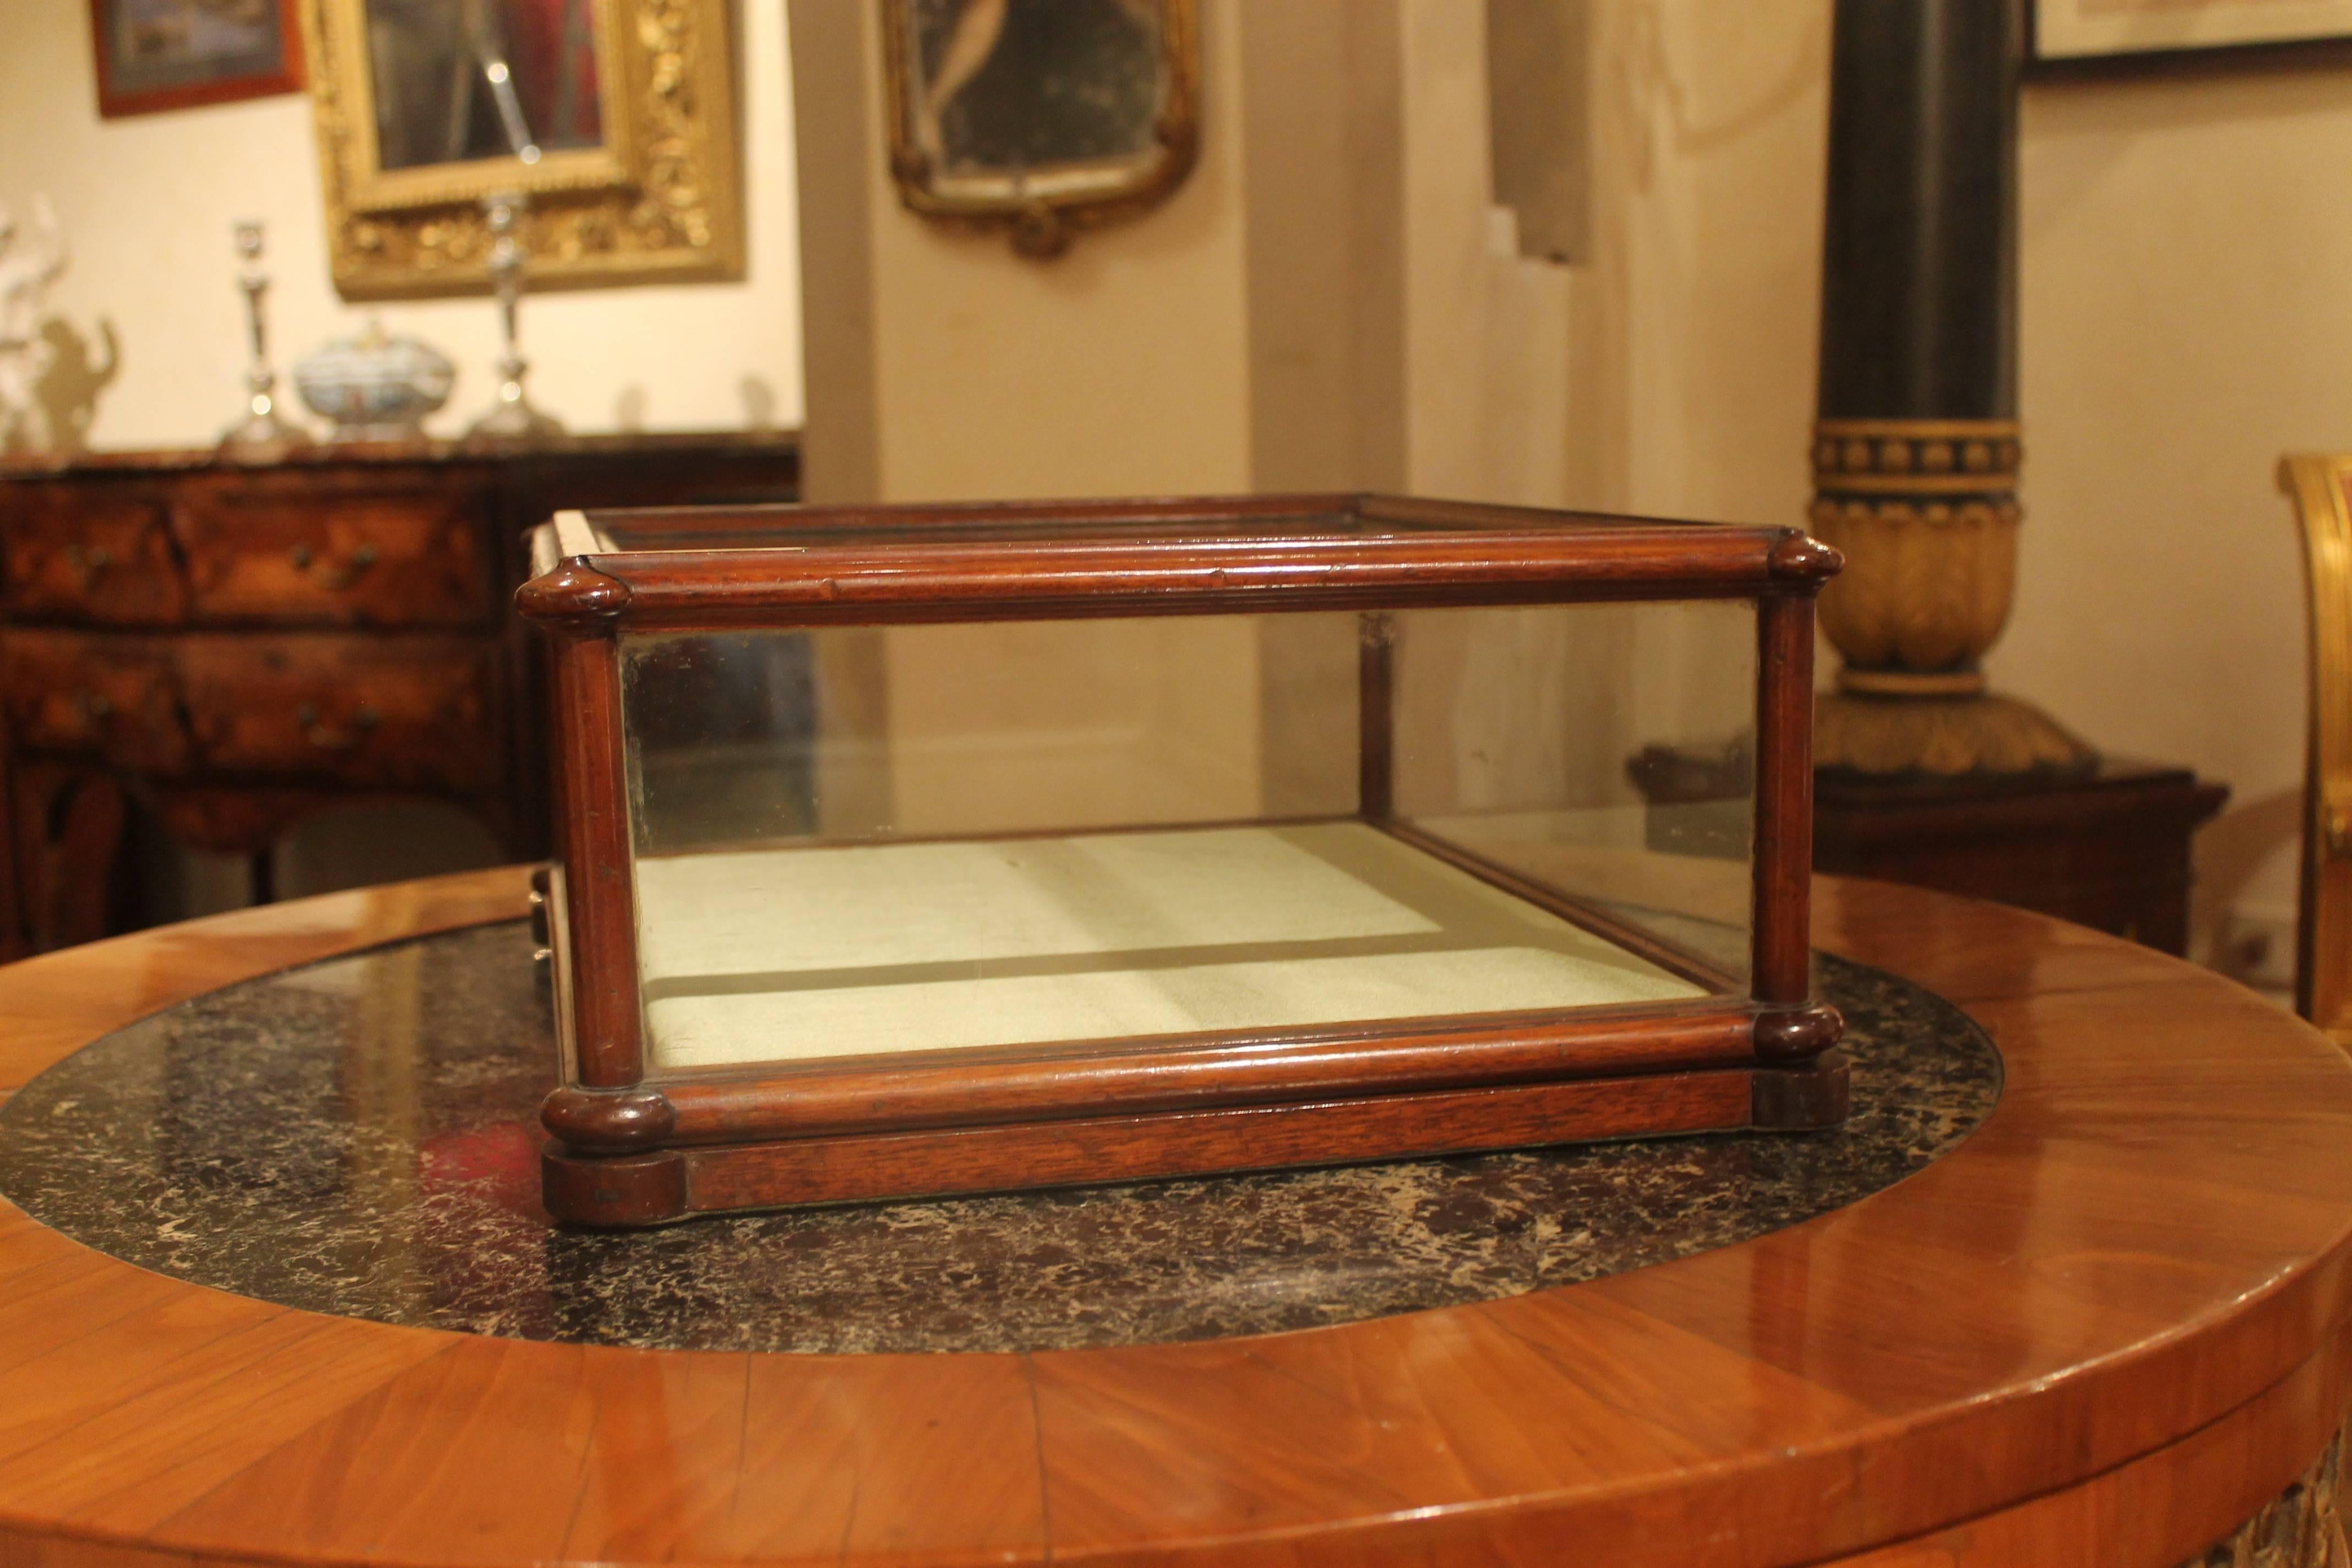 This English 19th century antique rectangular table cabinet display case or showcase of narrow proportions has a mahogany moulding frame throughout, the top and the sides are glazed with the original excellent thick glasses. The wood base is covered